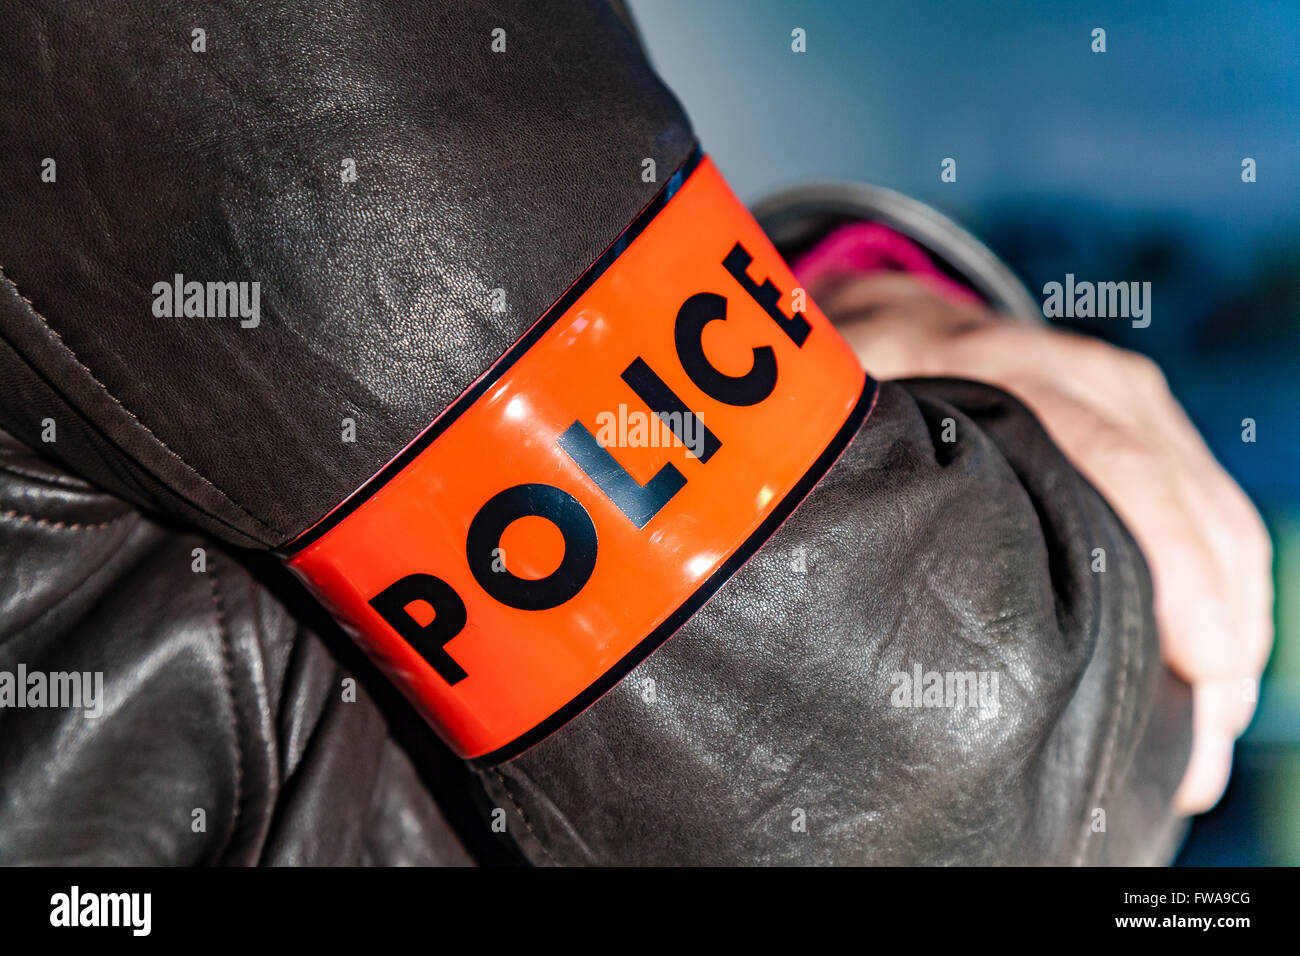 and Alamy images Police hi-res stock - photography armband